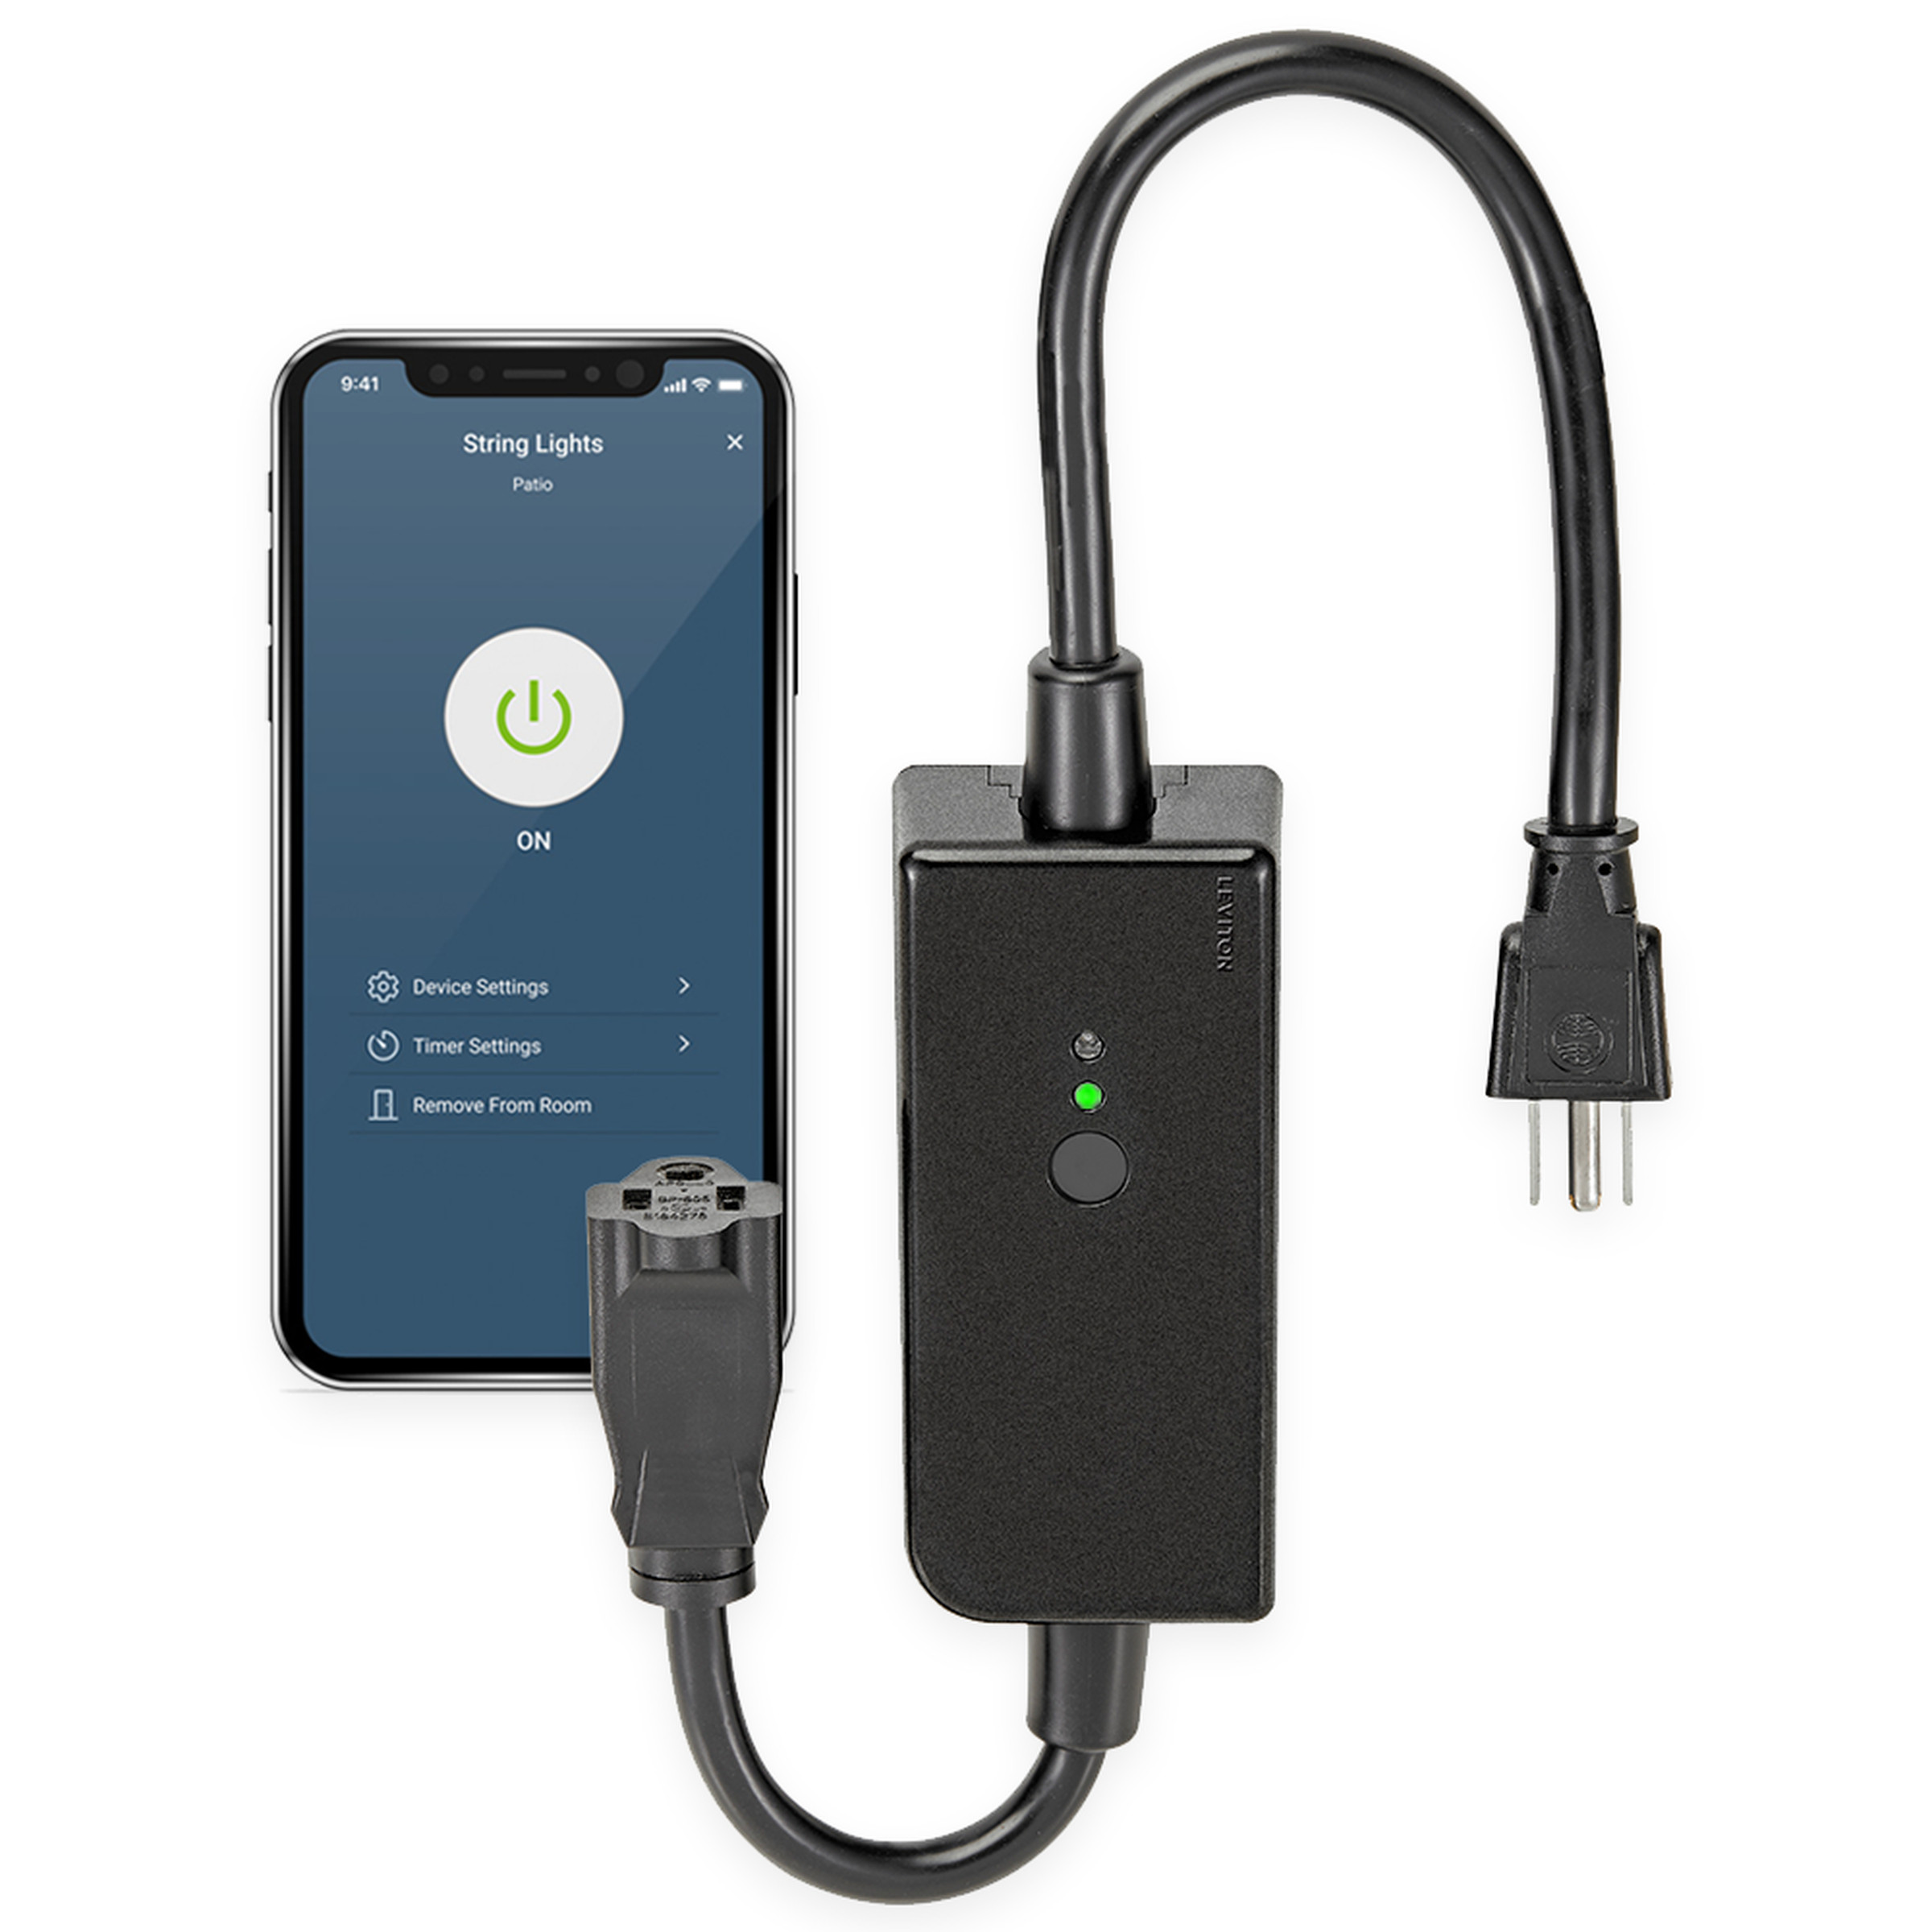 The Leviton plug works with Leviton’s app, Apple Home through Matter, Amazon Alexa, Google Home, and Samsung SmartThings.